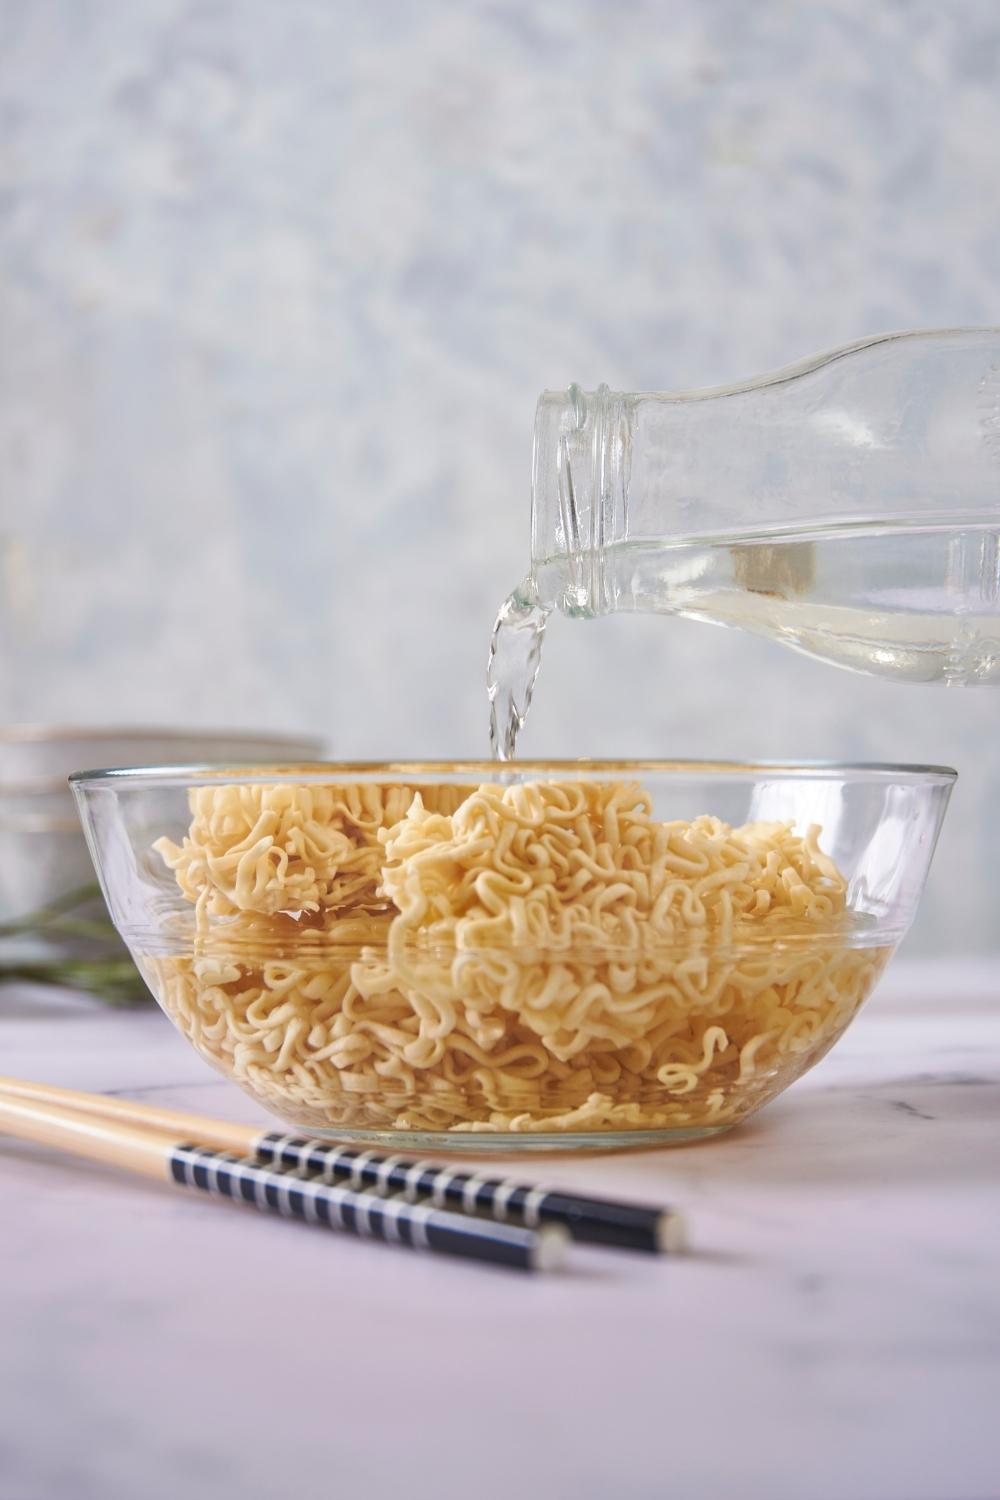 A clear bowl of uncooked ramen with a pitcher pouring water into the bowl and chopsticks next to the bowl.